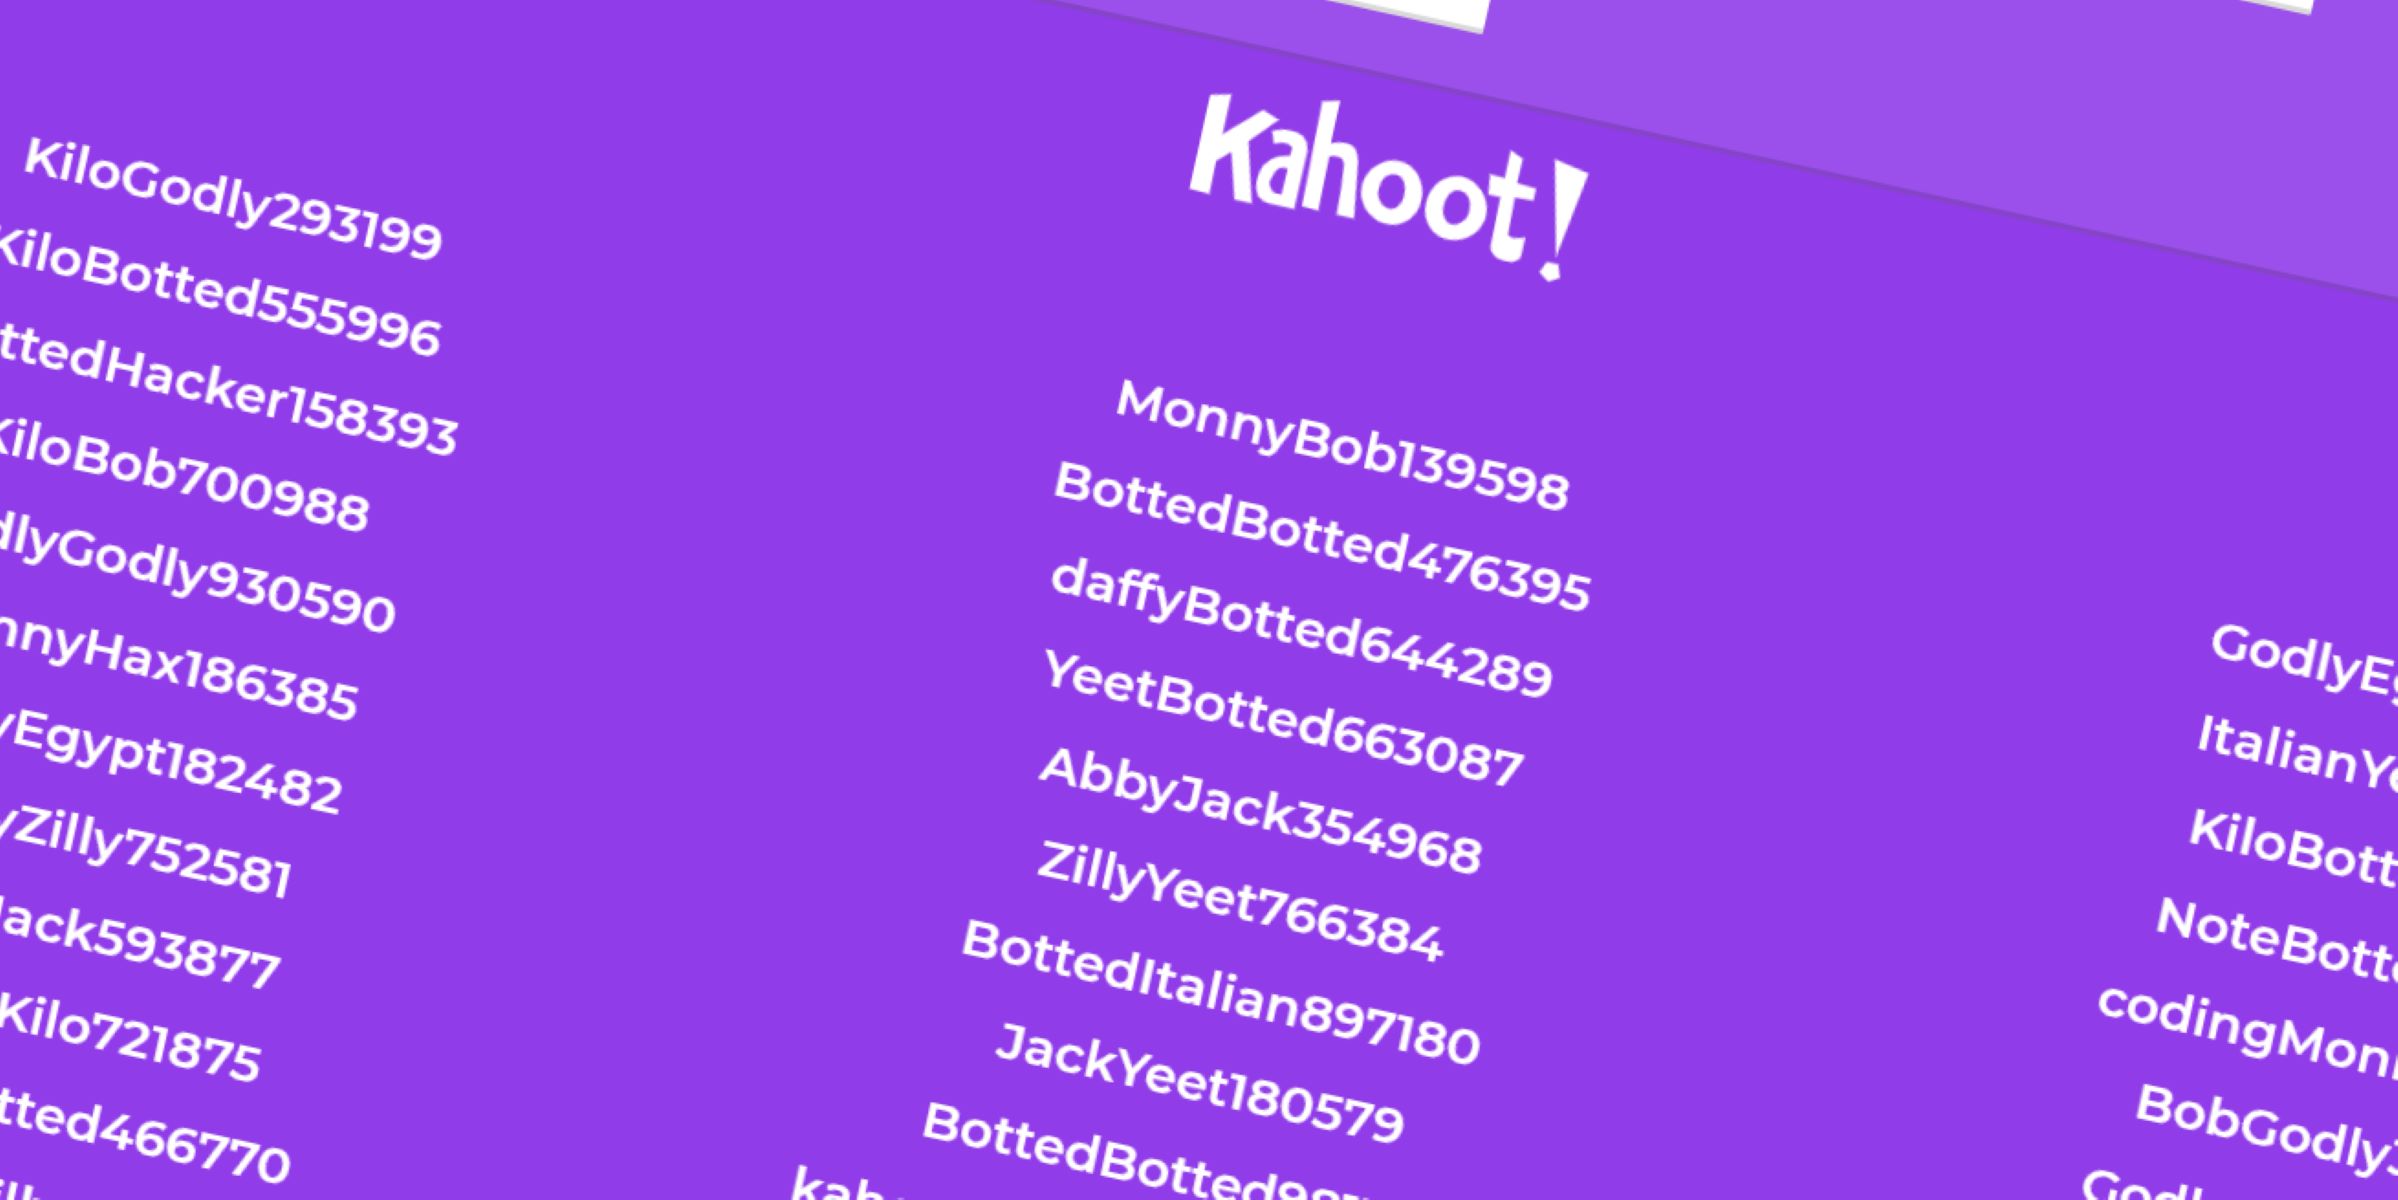 How To Get Bots In Kahoot